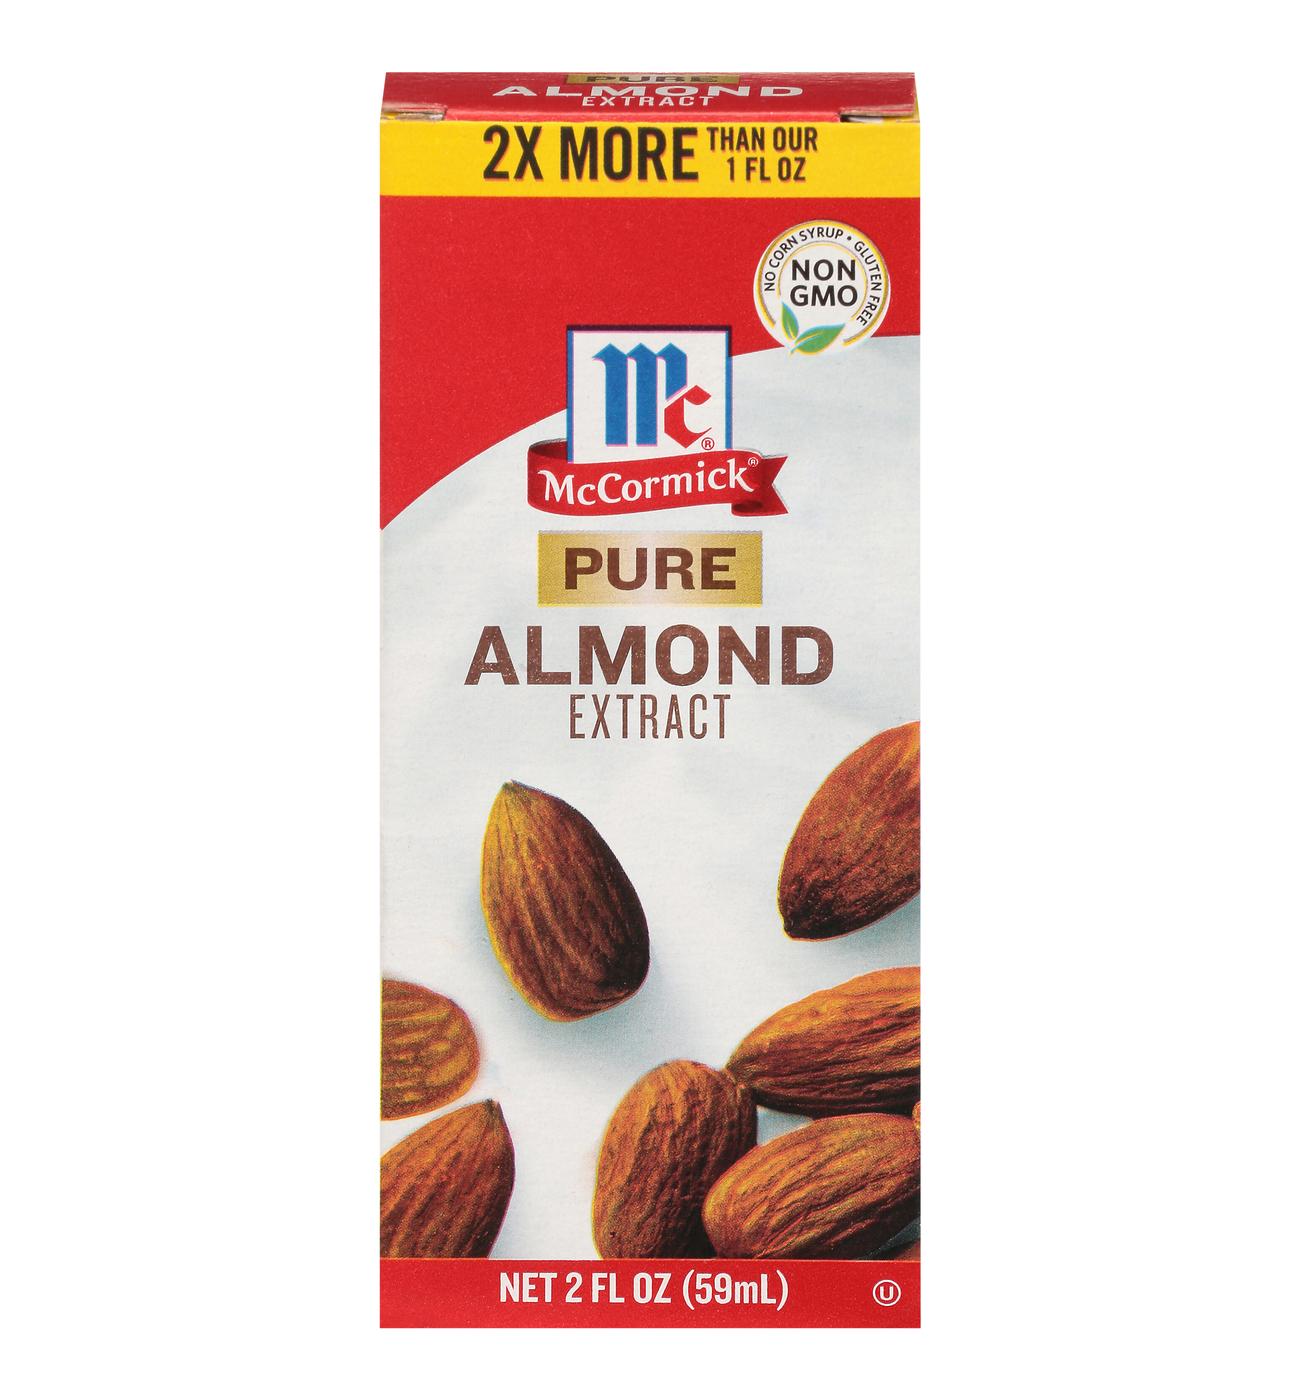 McCormick Pure Almond Extract; image 1 of 8